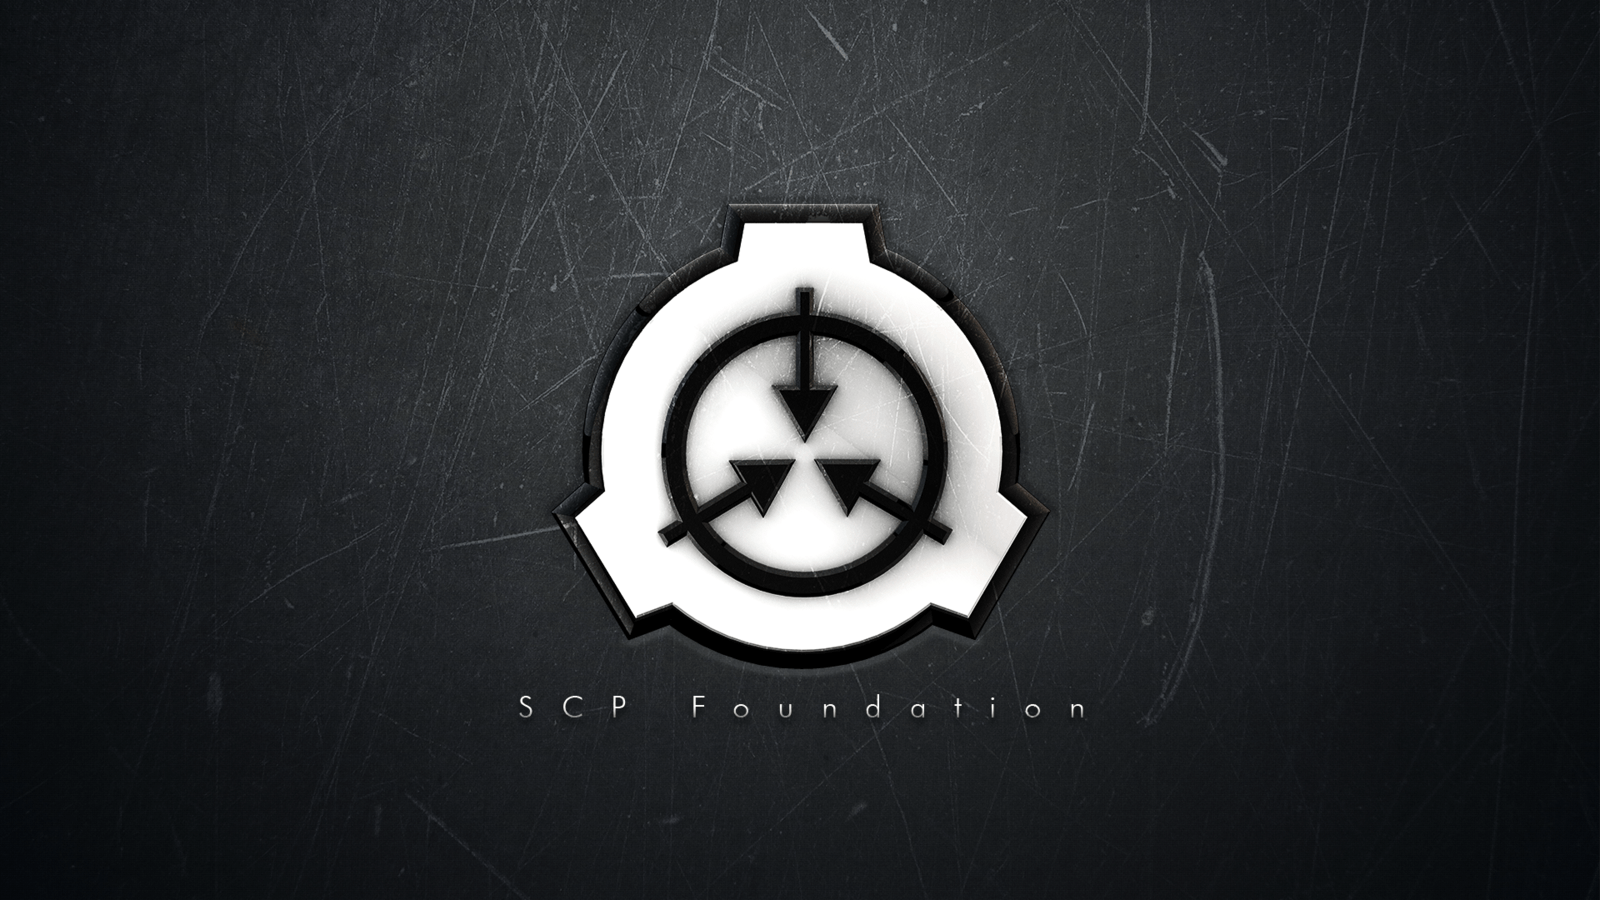 Image Gallery Scp Wallpaper